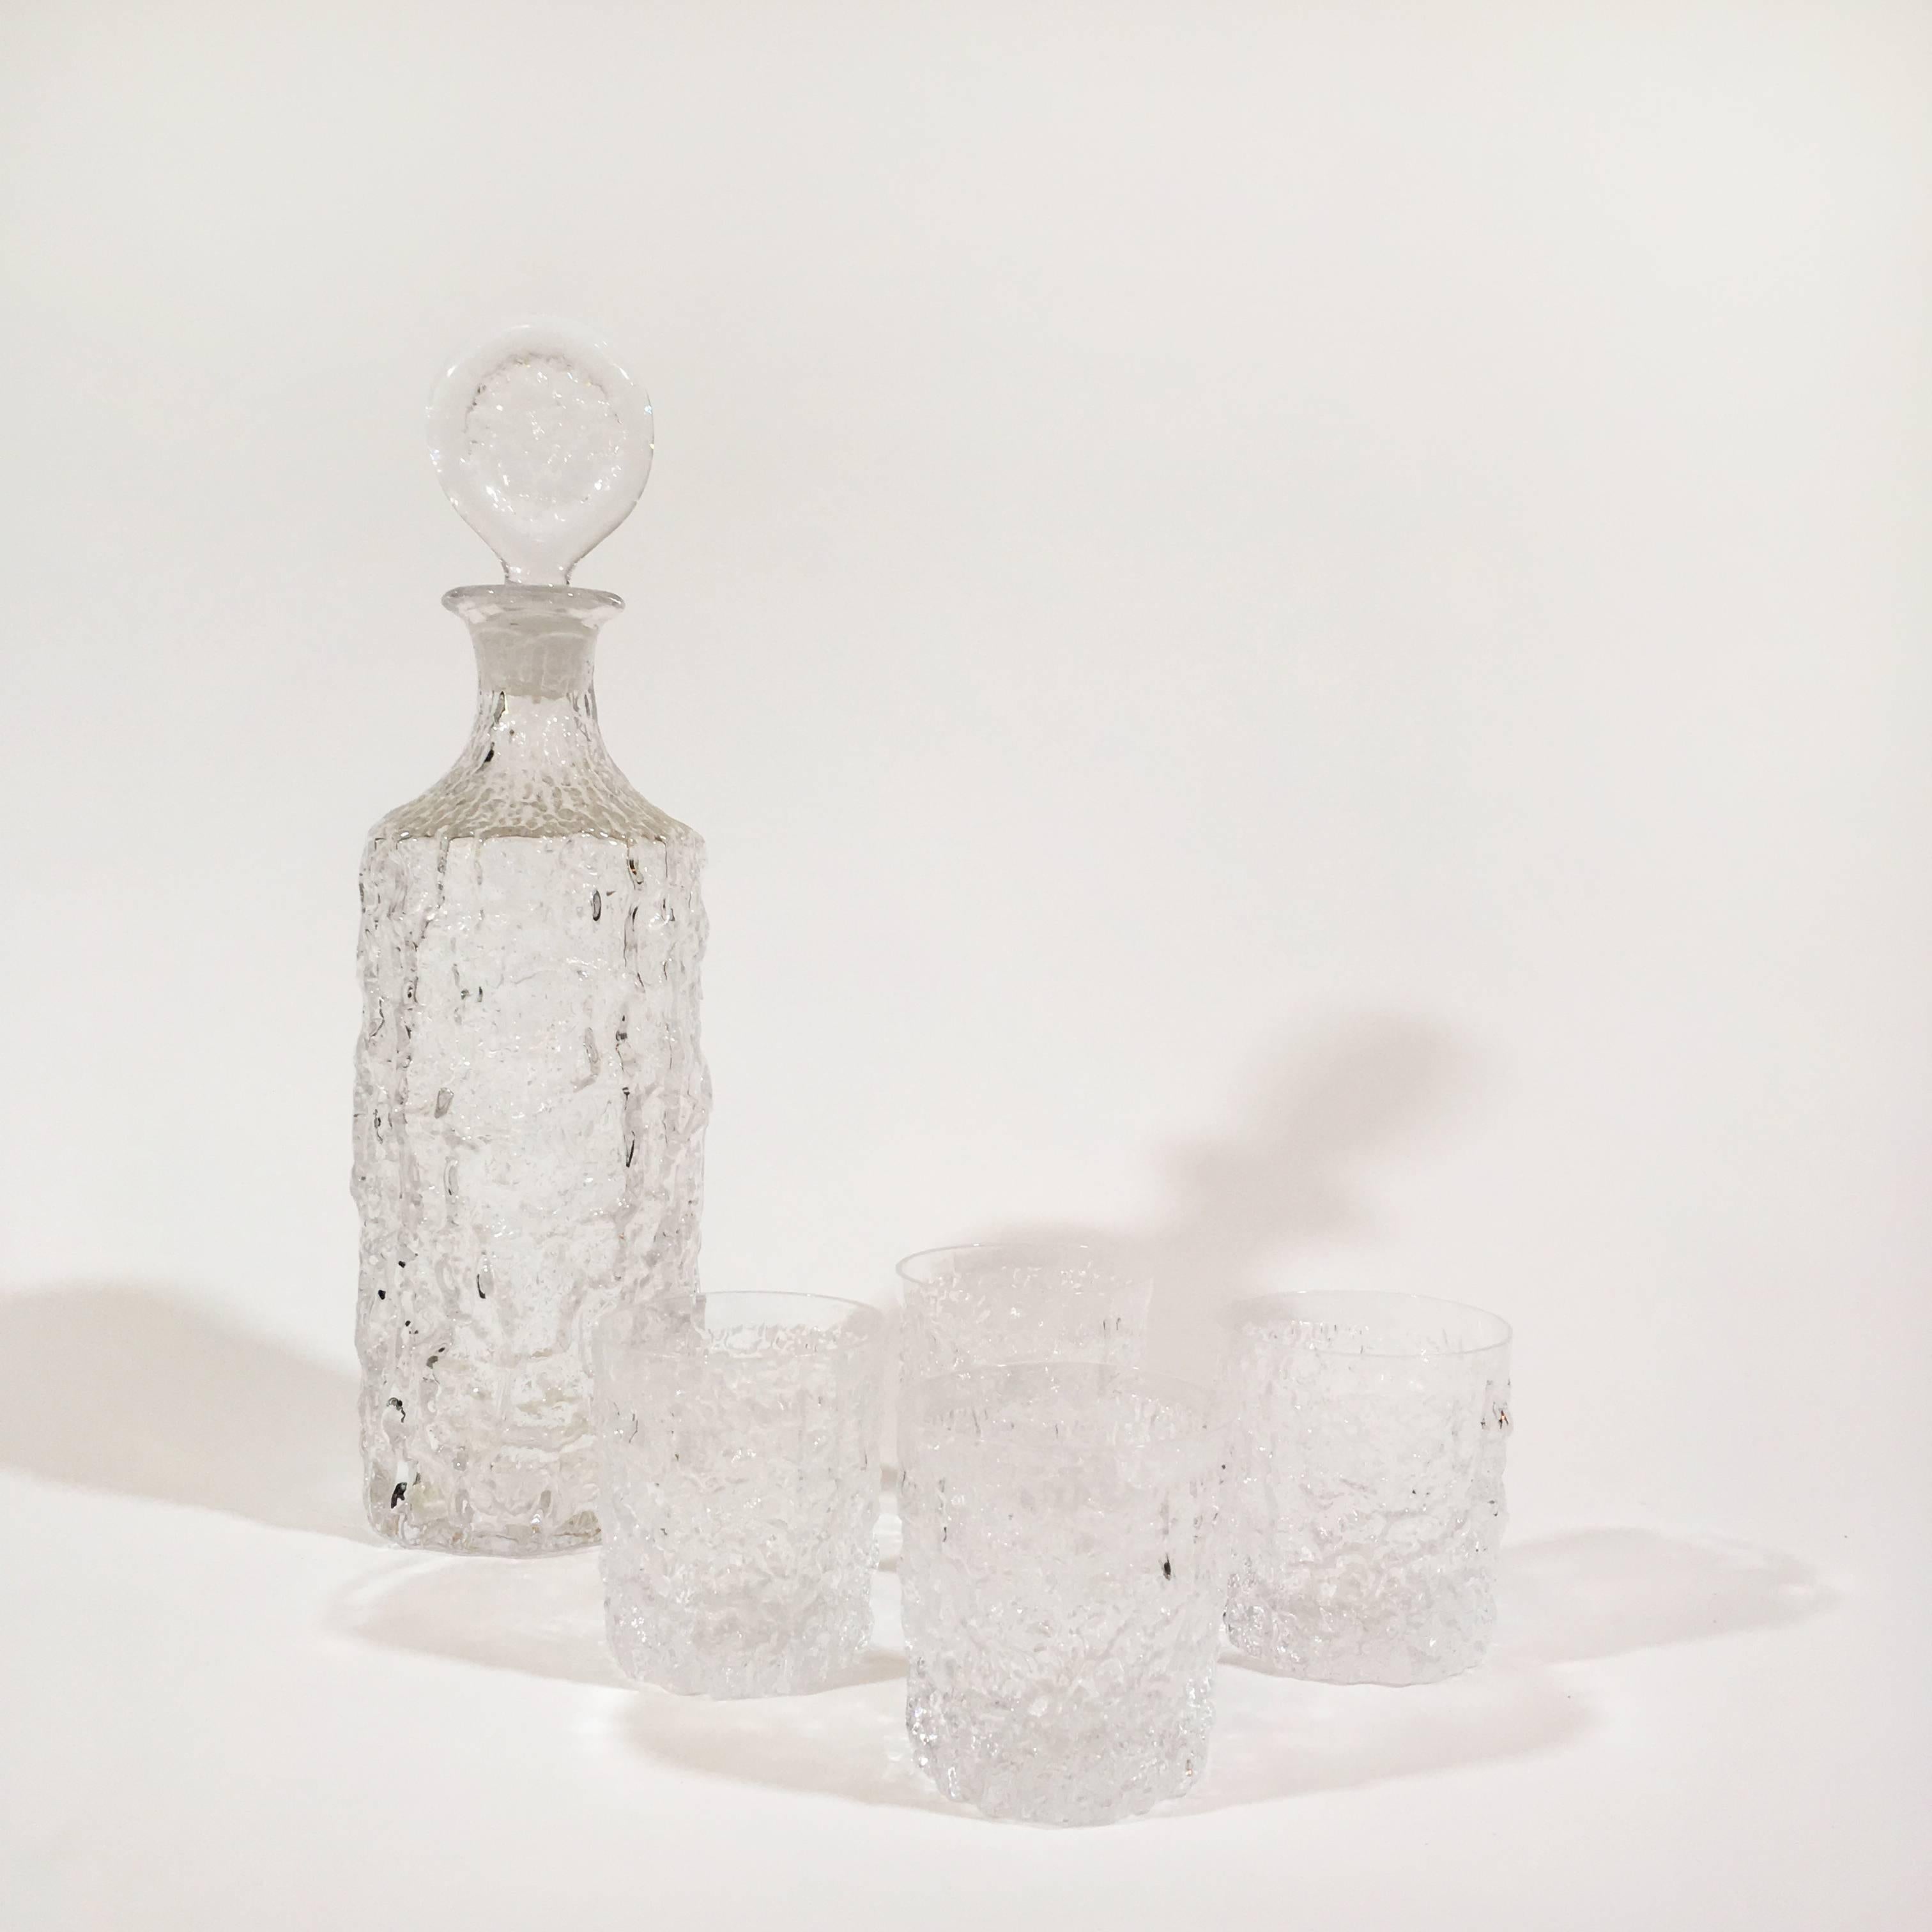 A Whitefriars glacier crystal glass decanter designed in 1972 by Geoffrey Baxter with four whisky glasses. A Classic design which has stood the test of time.
Measure: Decanter depth 3.75; width 3.75; height 13 inches
Glasses 2.75 D x H 3 inches.